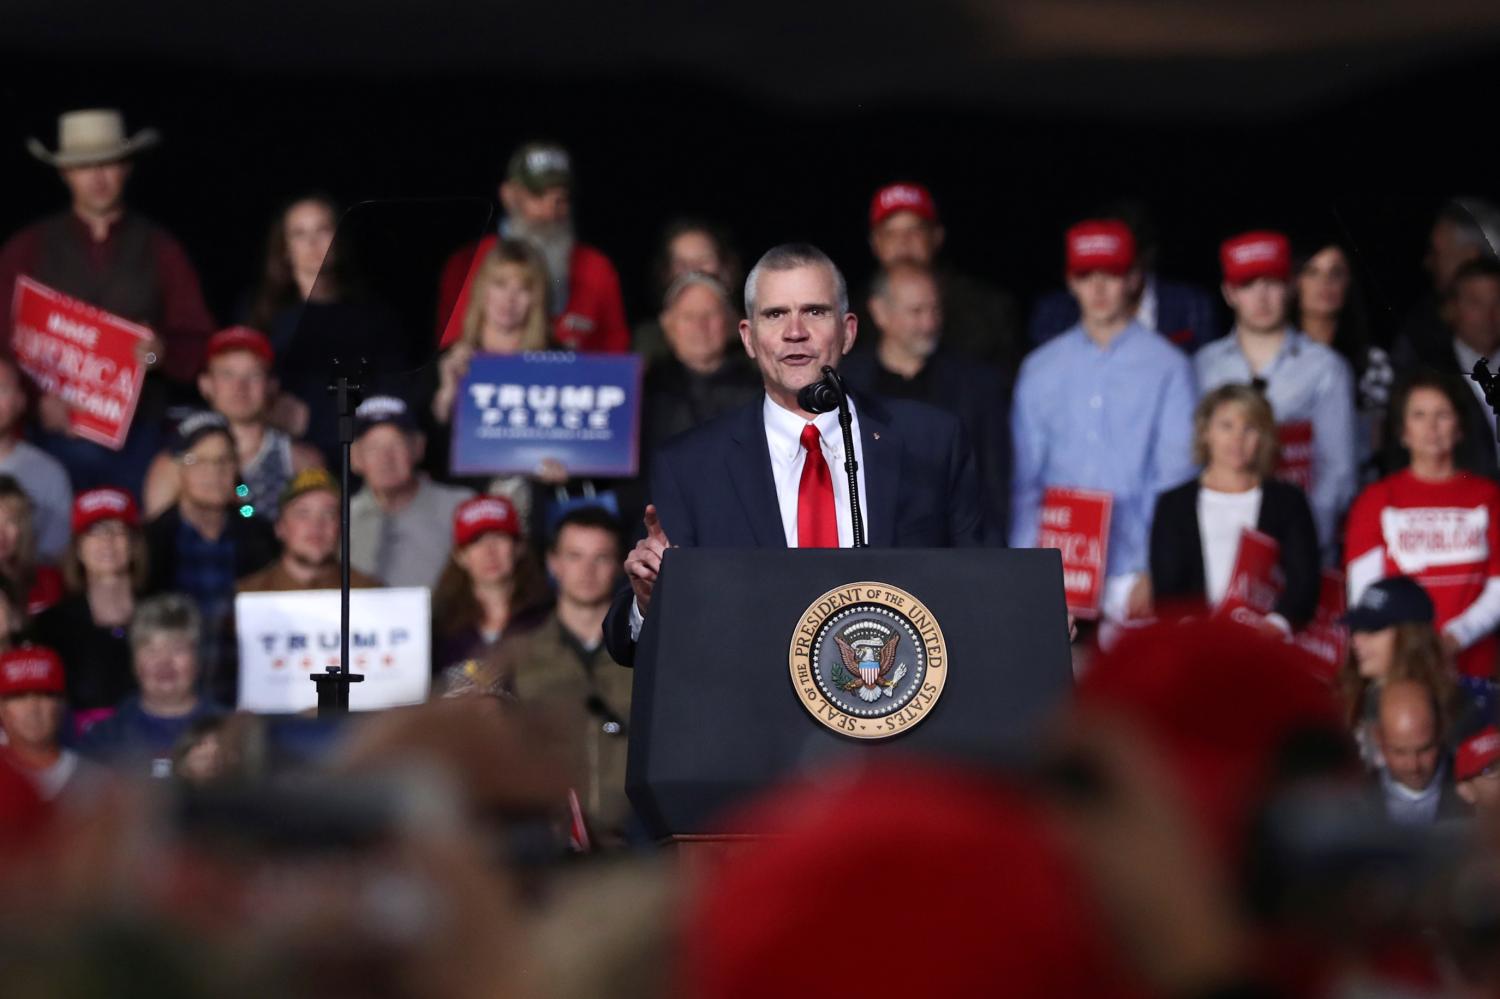 Republican candidate for U.S. Senate Matt Rosendale speaks to the crowd during U.S. President Donald Trump's rally with supporters in a hangar at Missoula International Airport in Missoula, Montana, U.S. October 18, 2018. REUTERS/Jonathan Ernst - RC13421CCCE0